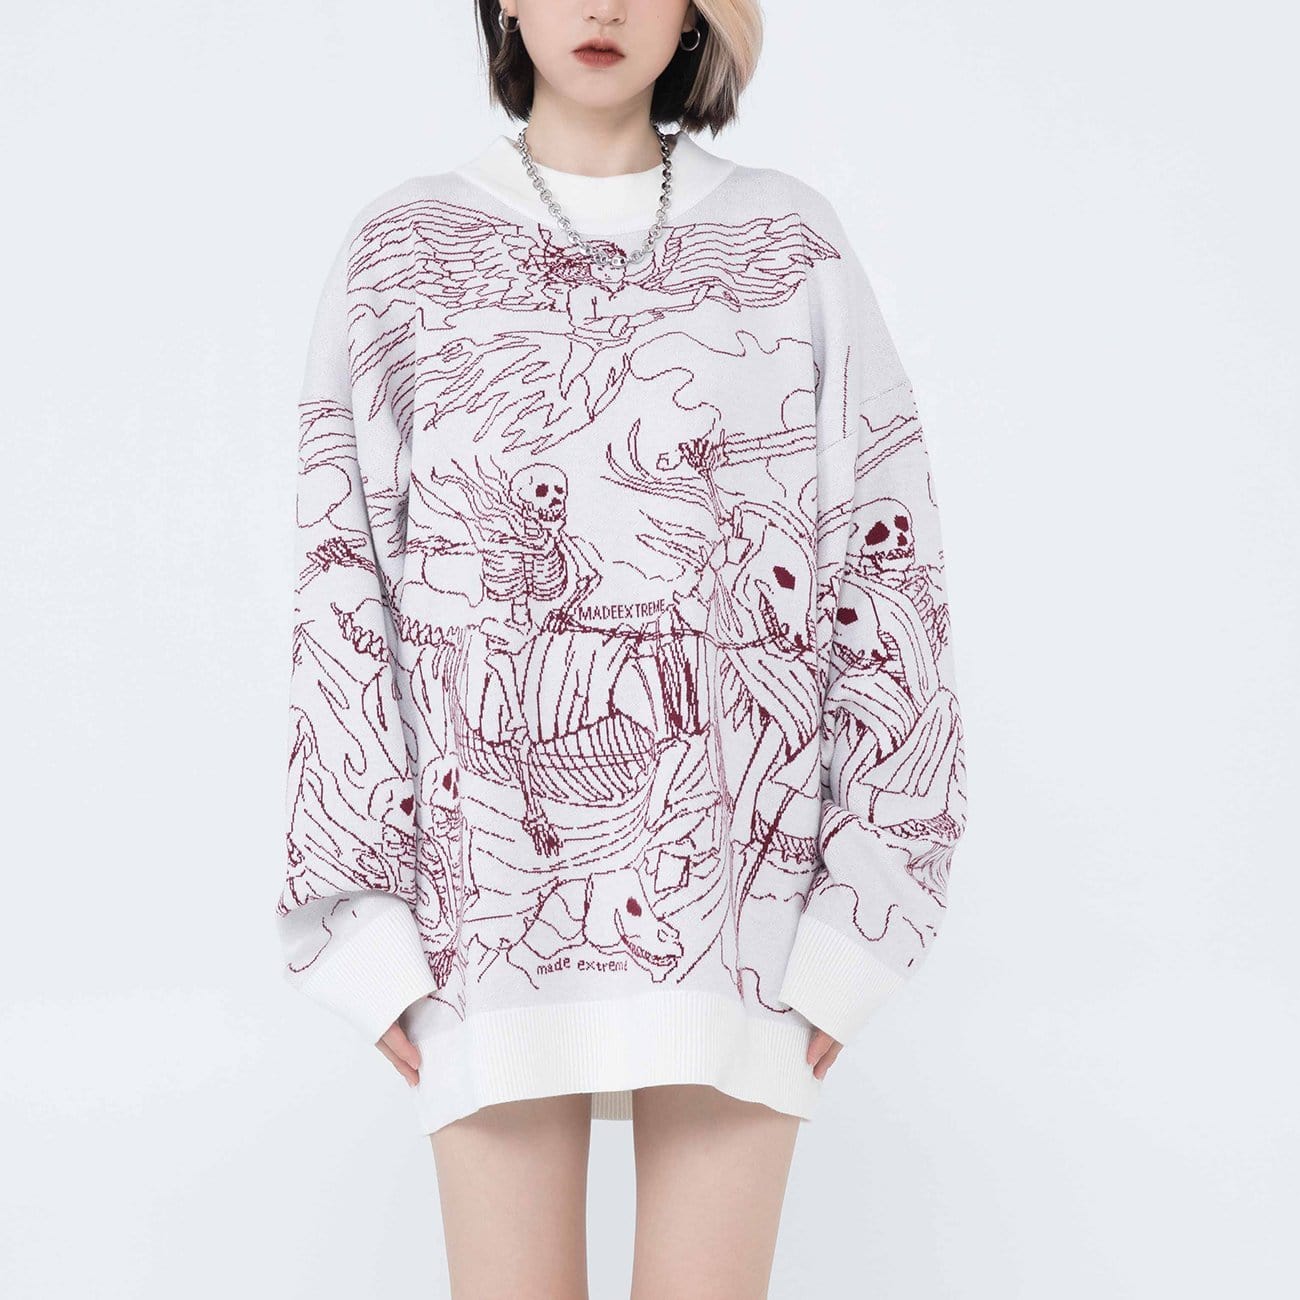 TO Dark Skeleton Riding Horse Knitted Sweater